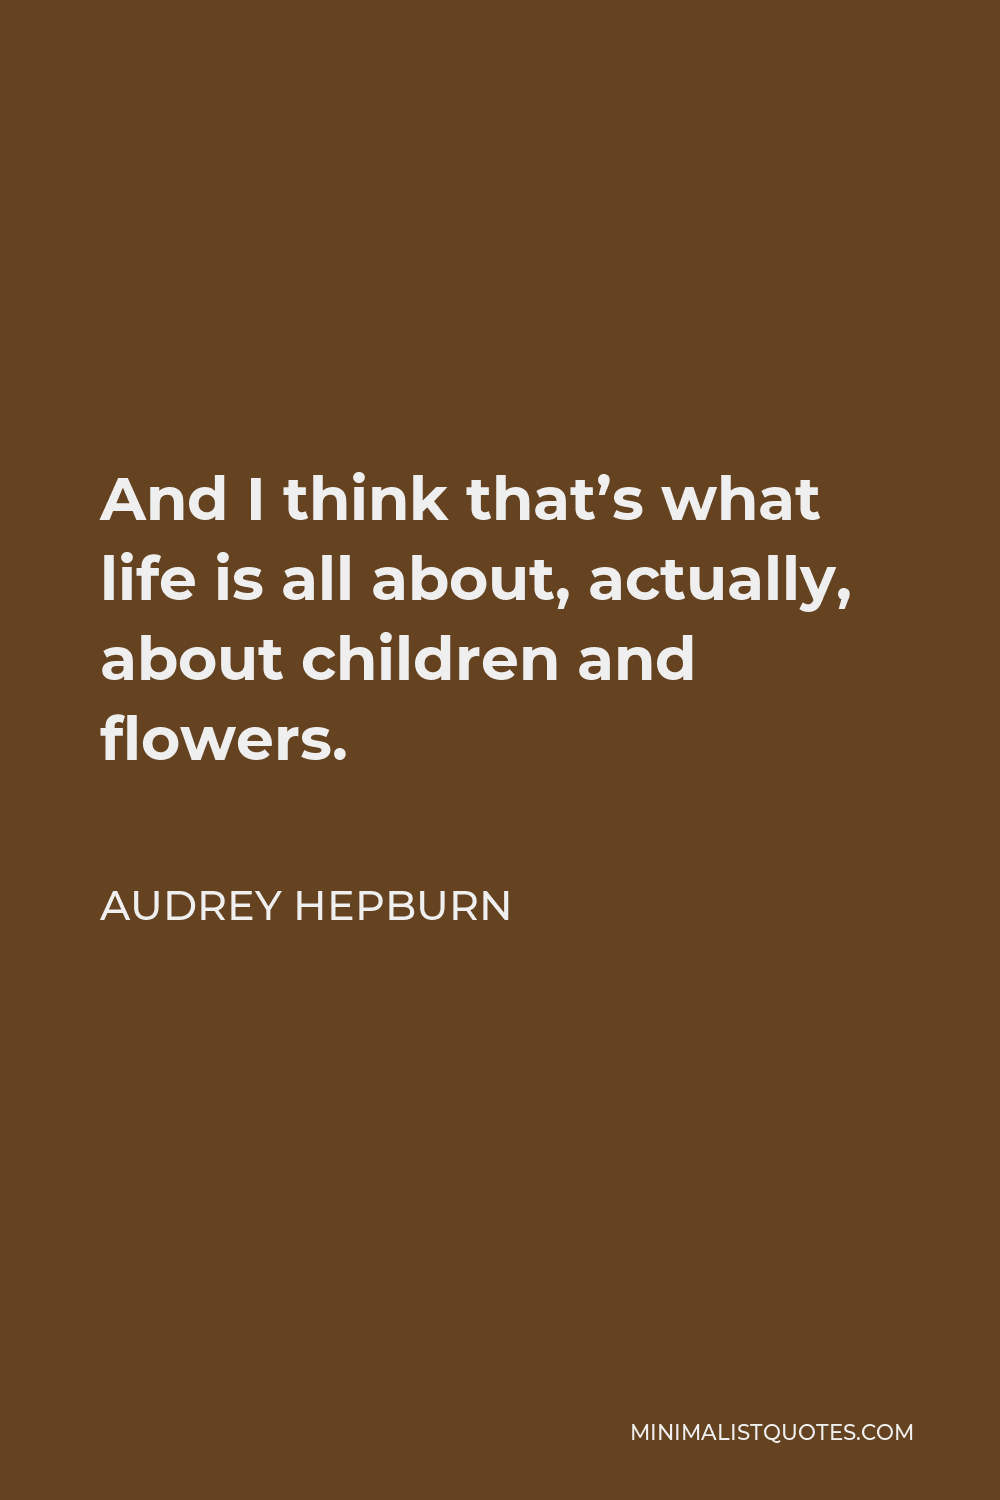 Audrey Hepburn Quote - And I think that’s what life is all about, actually, about children and flowers.